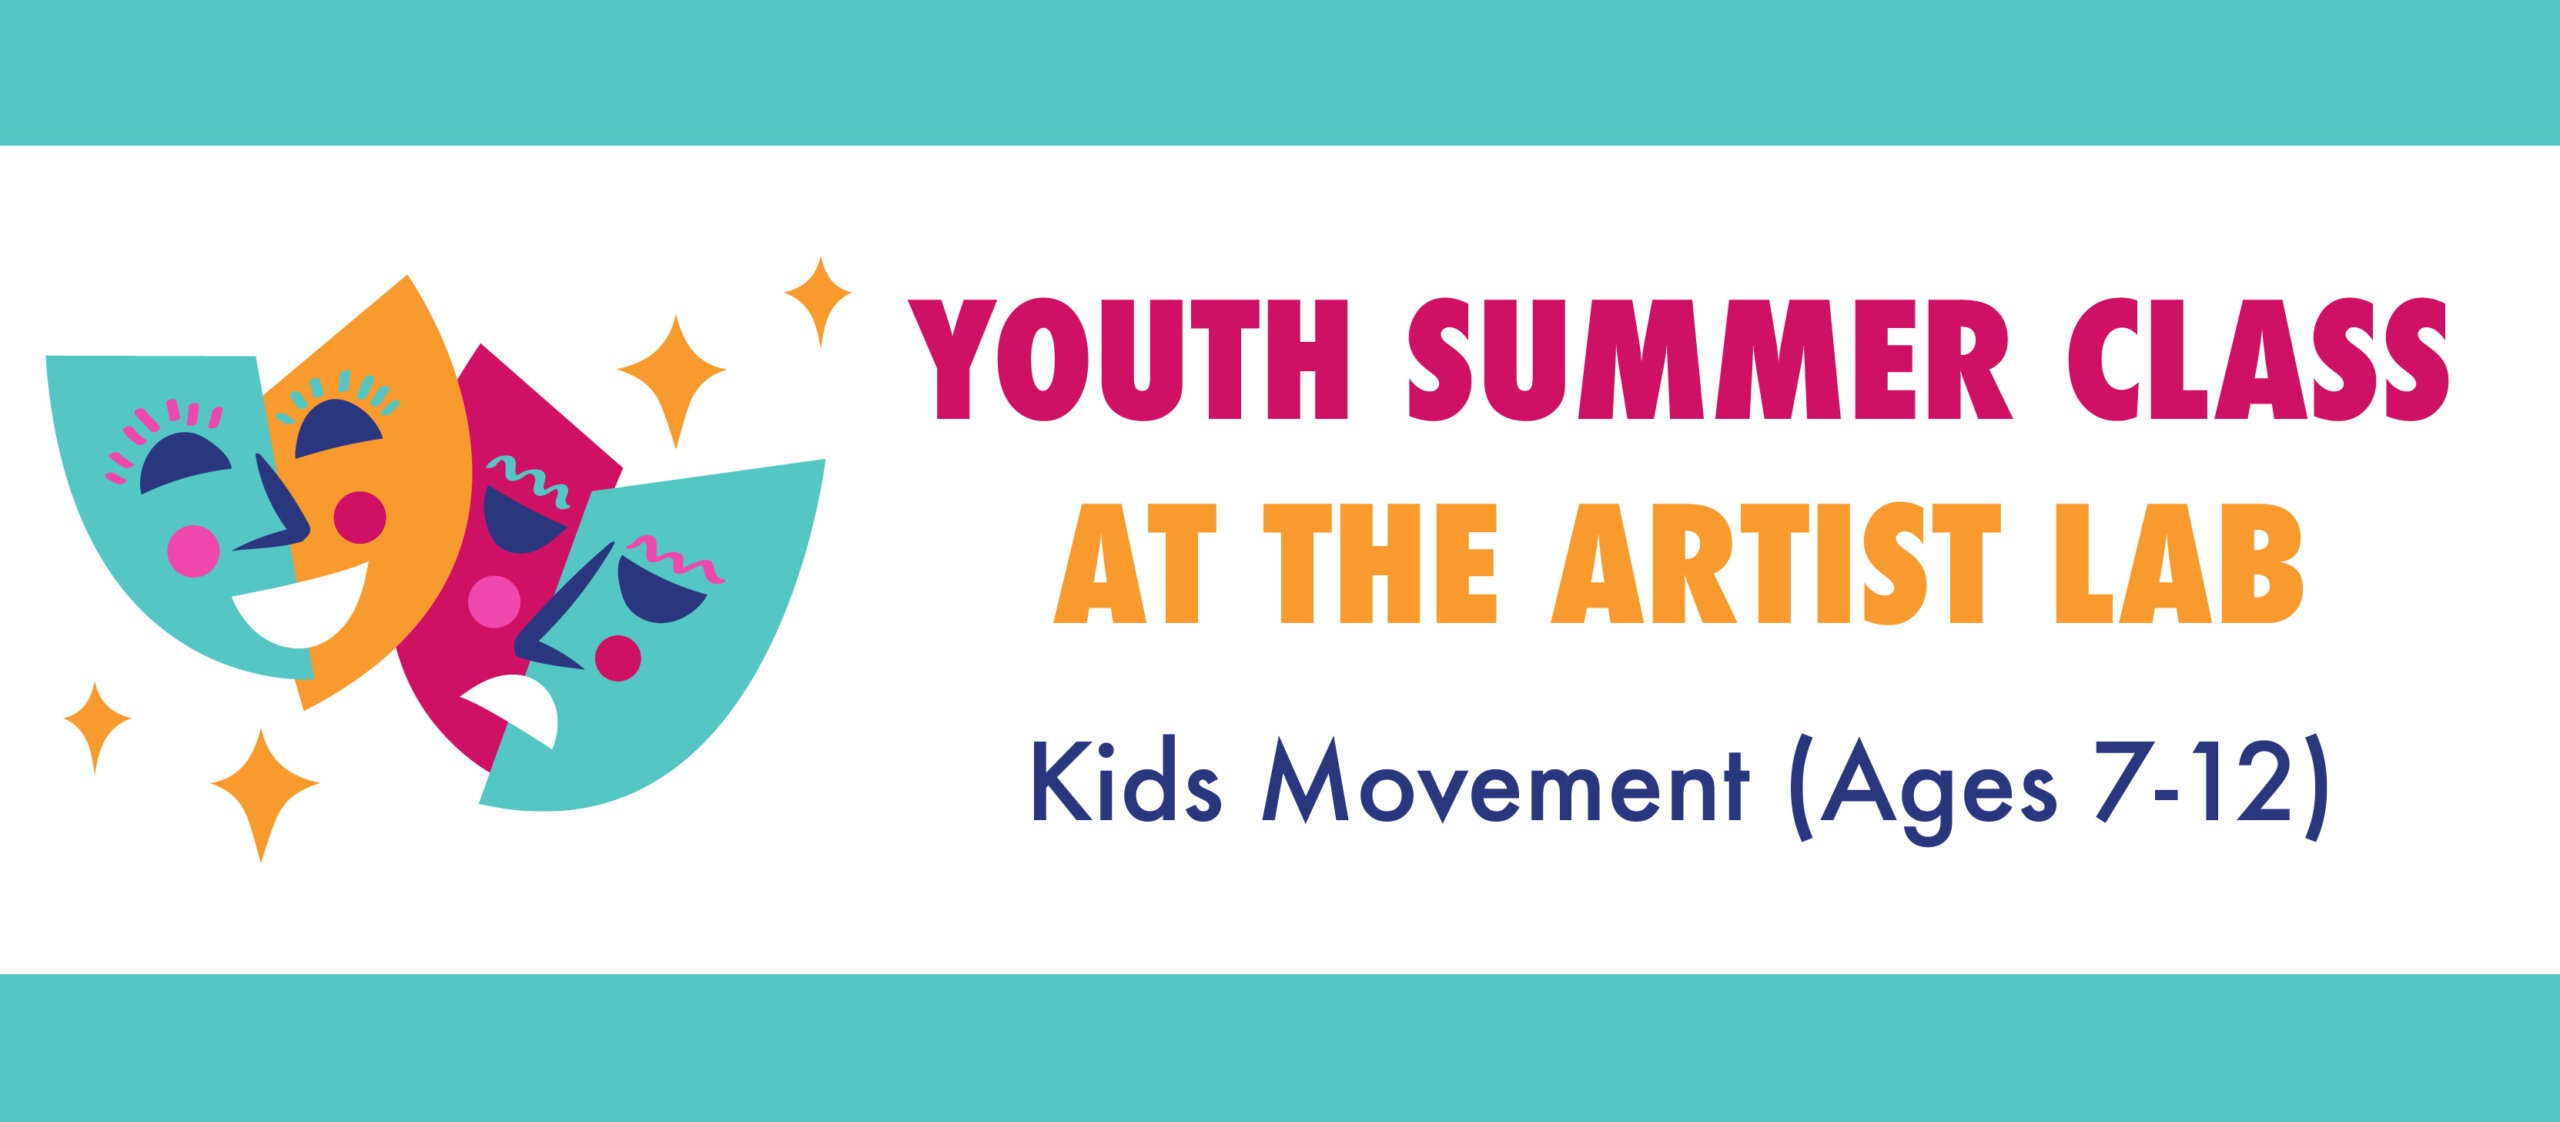 Artist Lab: Youth Summer Class Kids Movement (Ages 7-12)